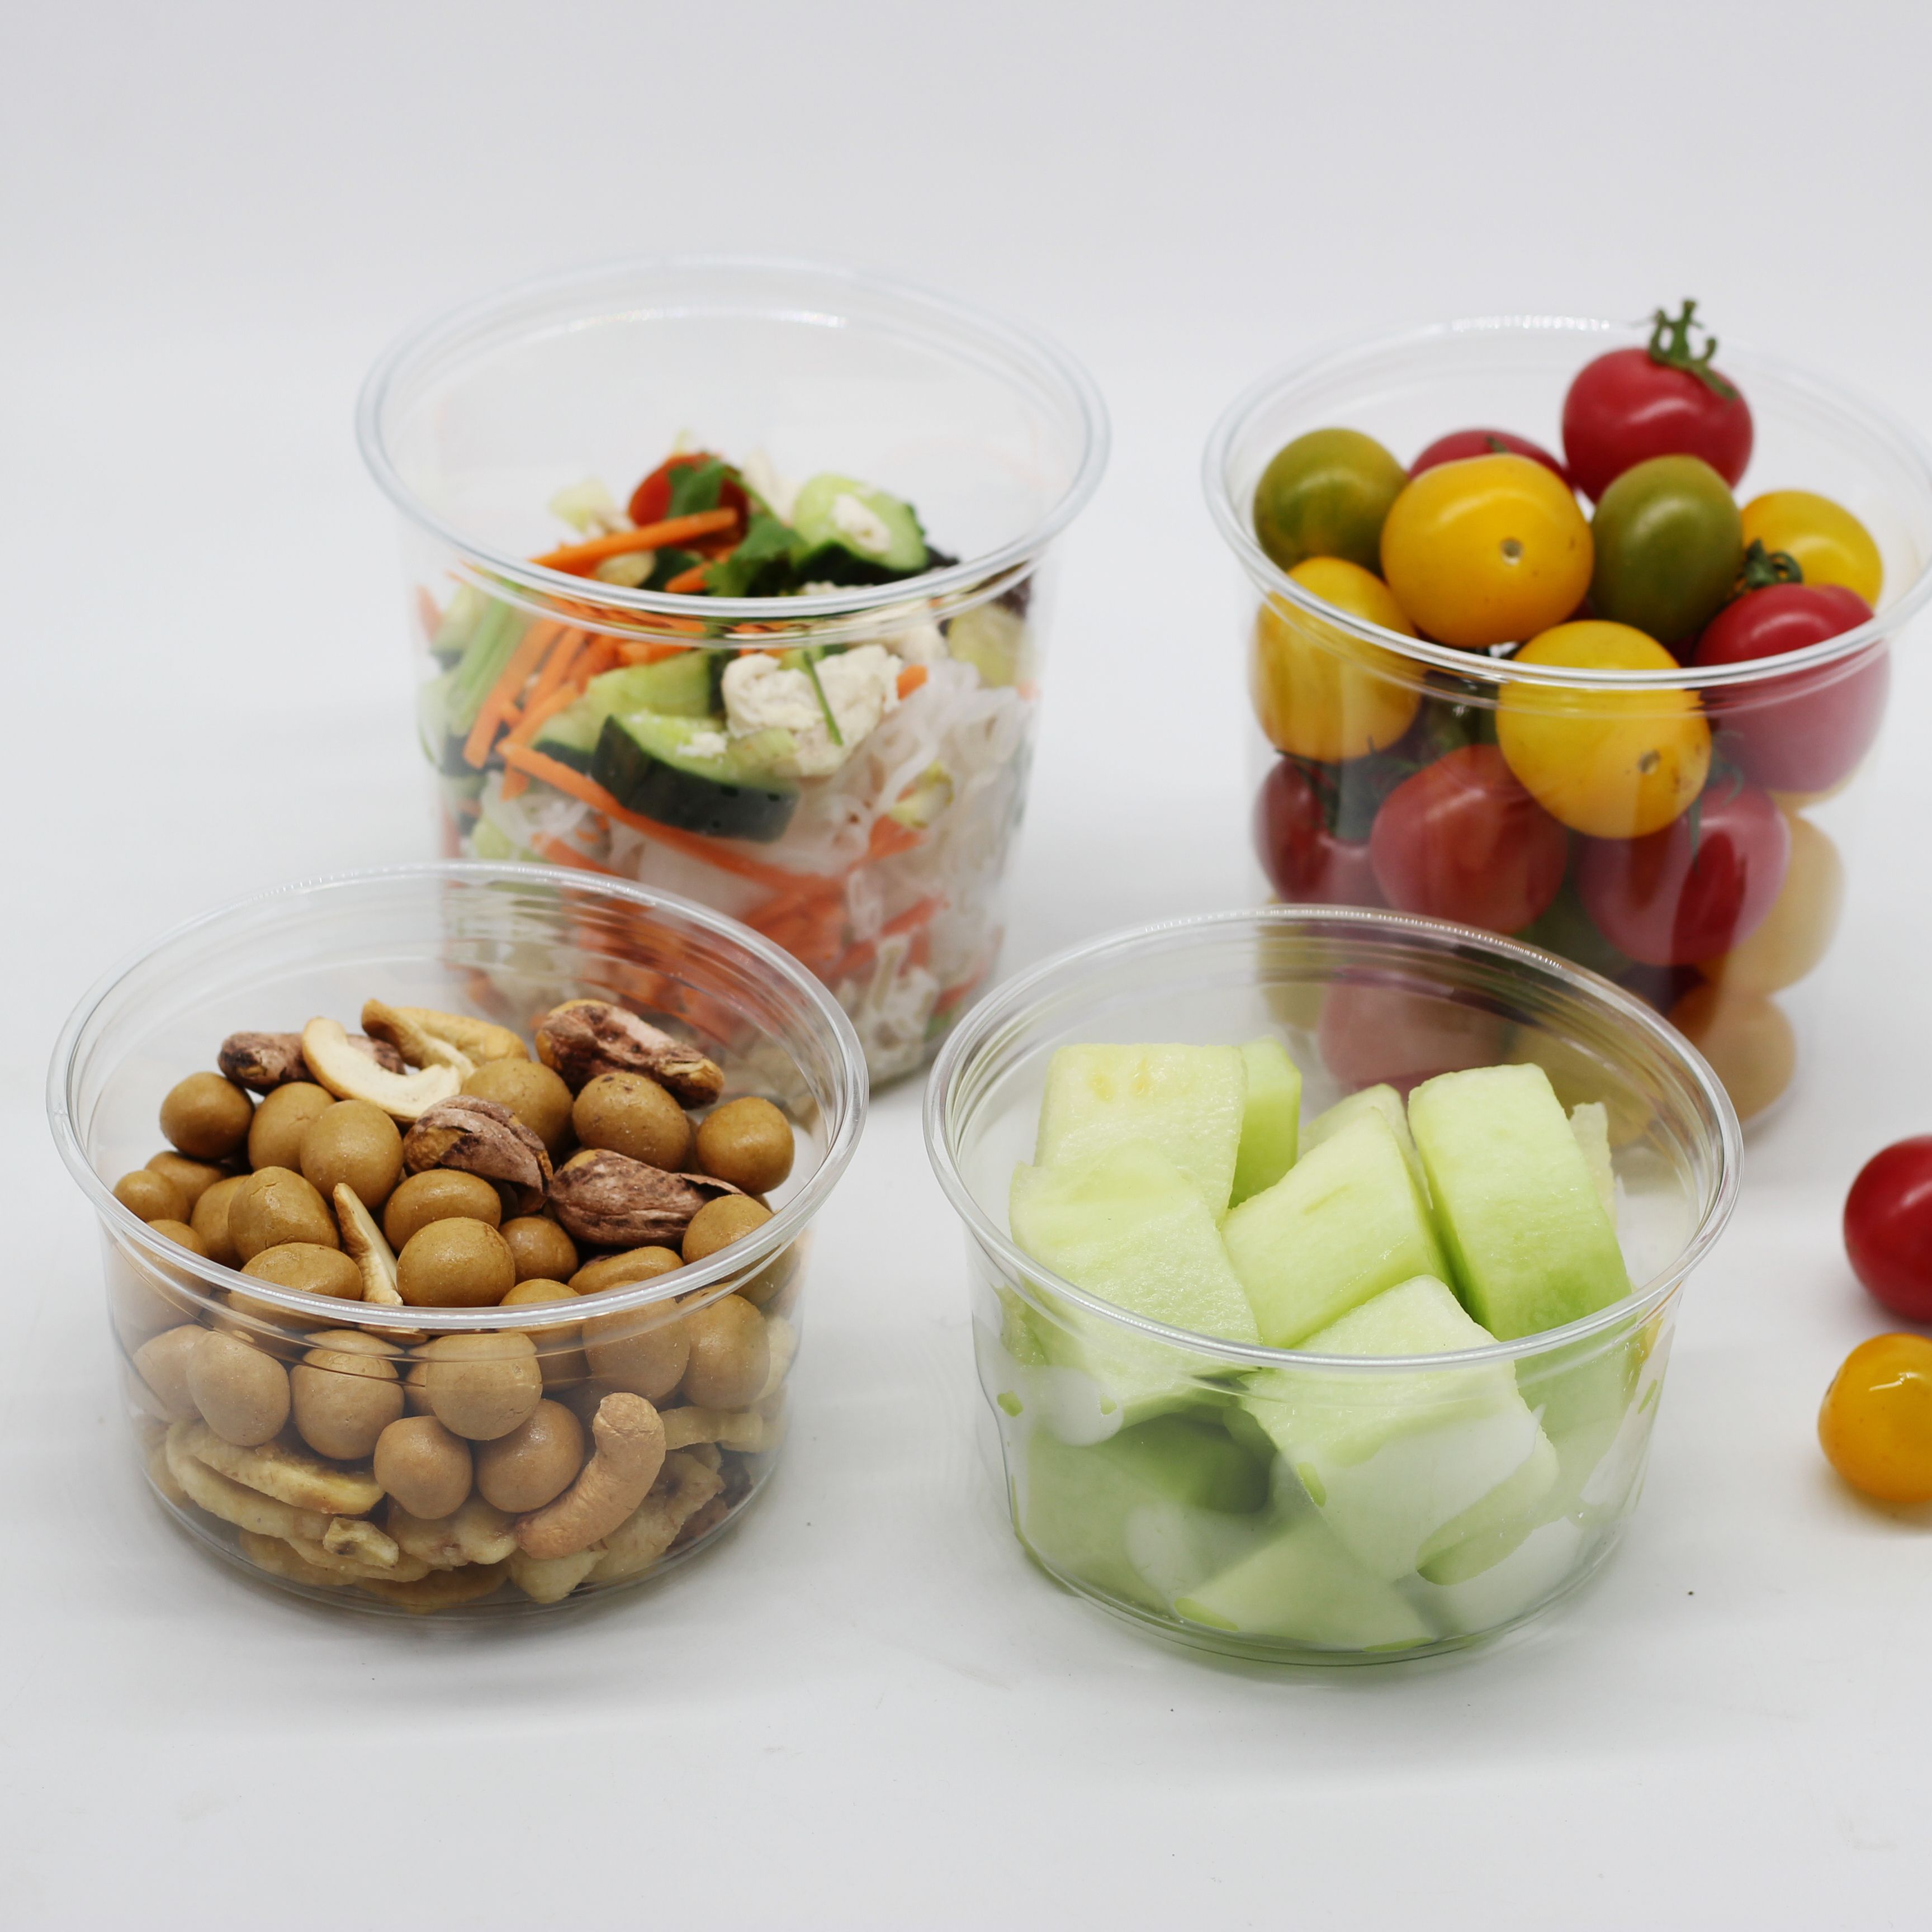 12oz Clear Disposable Cups 460ml Plastic Bowls with lid for Fruits Yoghurt, Salad Smoothie Nuts